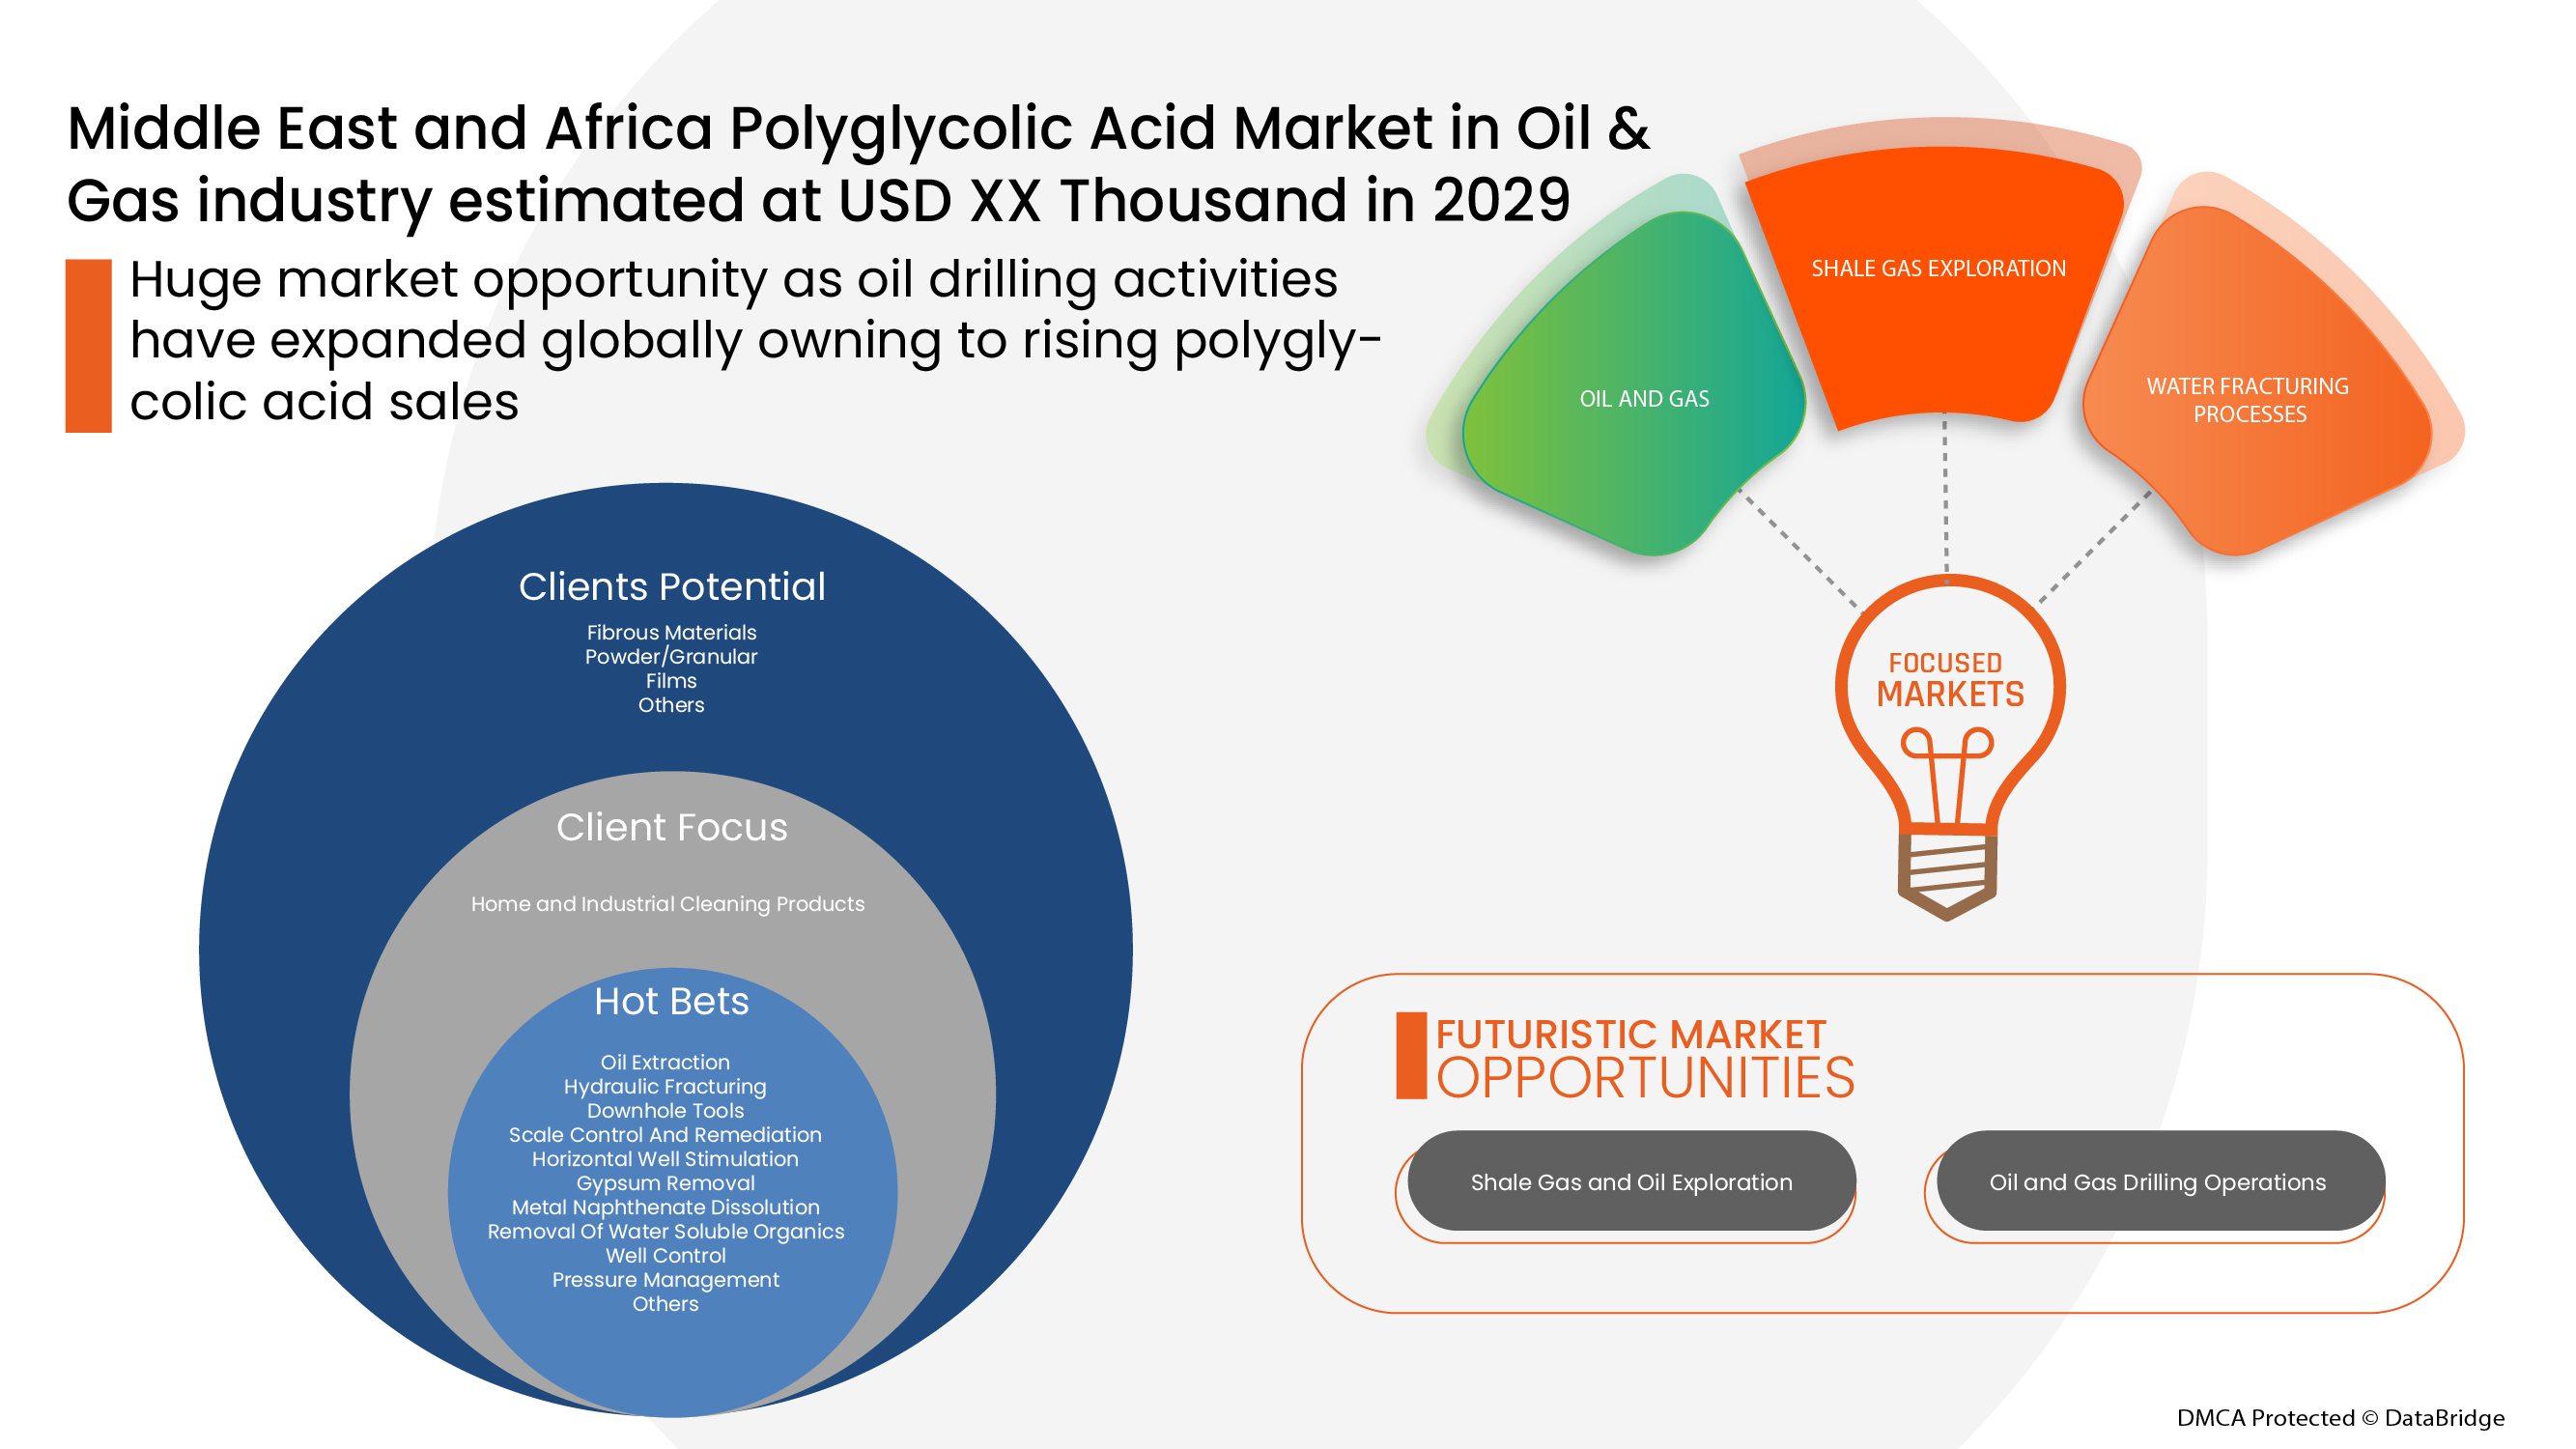 Middle East and Africa Polyglycolic Acid Market in Oil and Gas industry